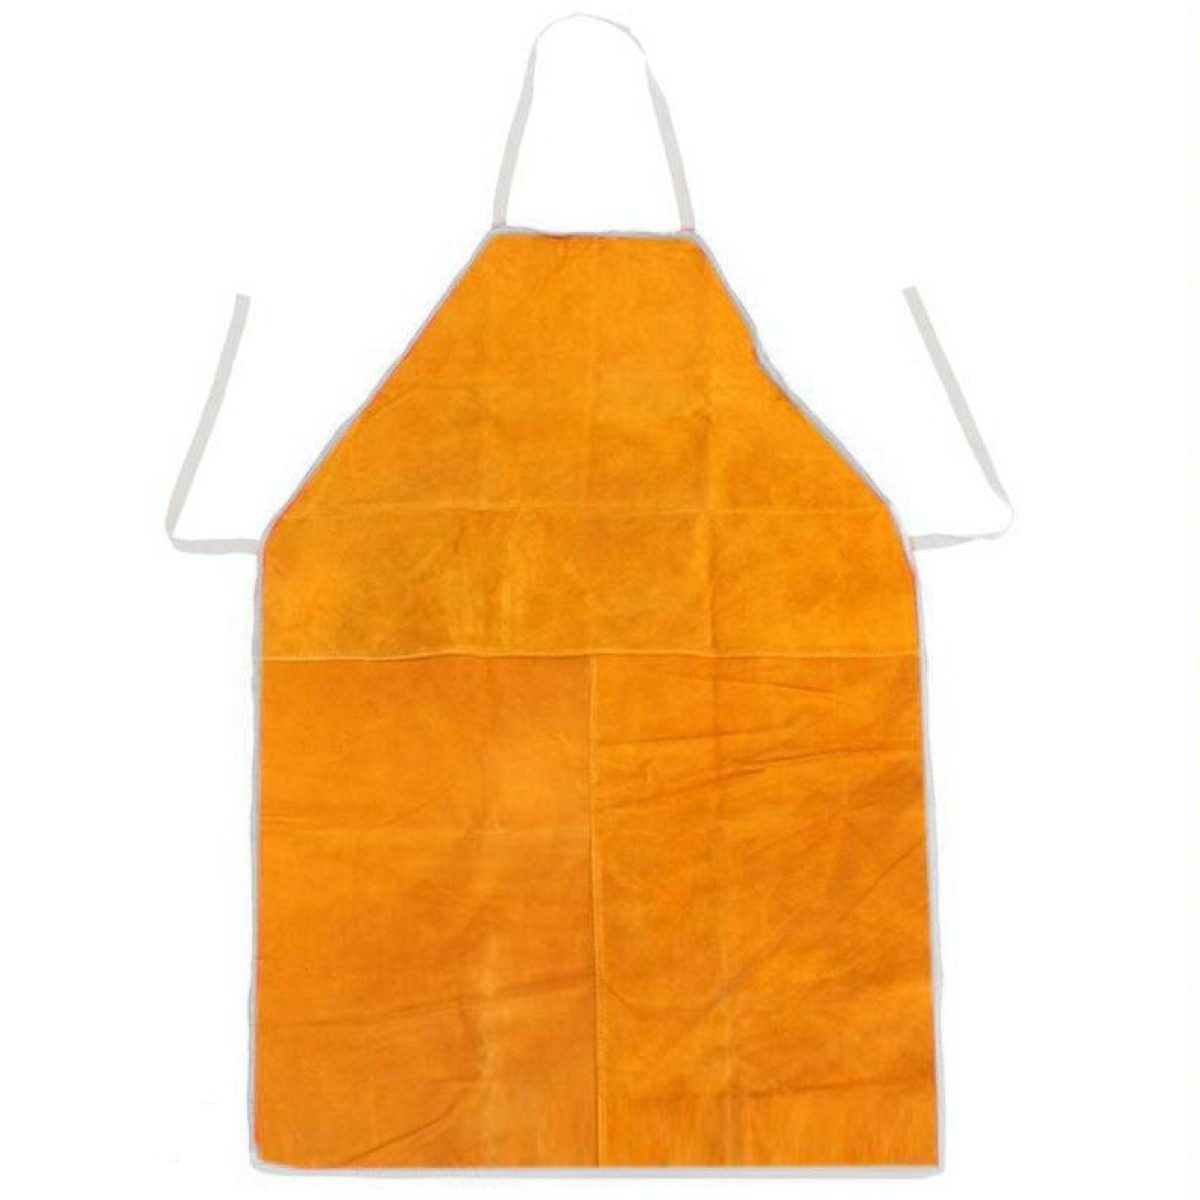 Full Leather Electric Welding Apron High Temperature Fireproof Star Splash Protective Clothing(Orange)